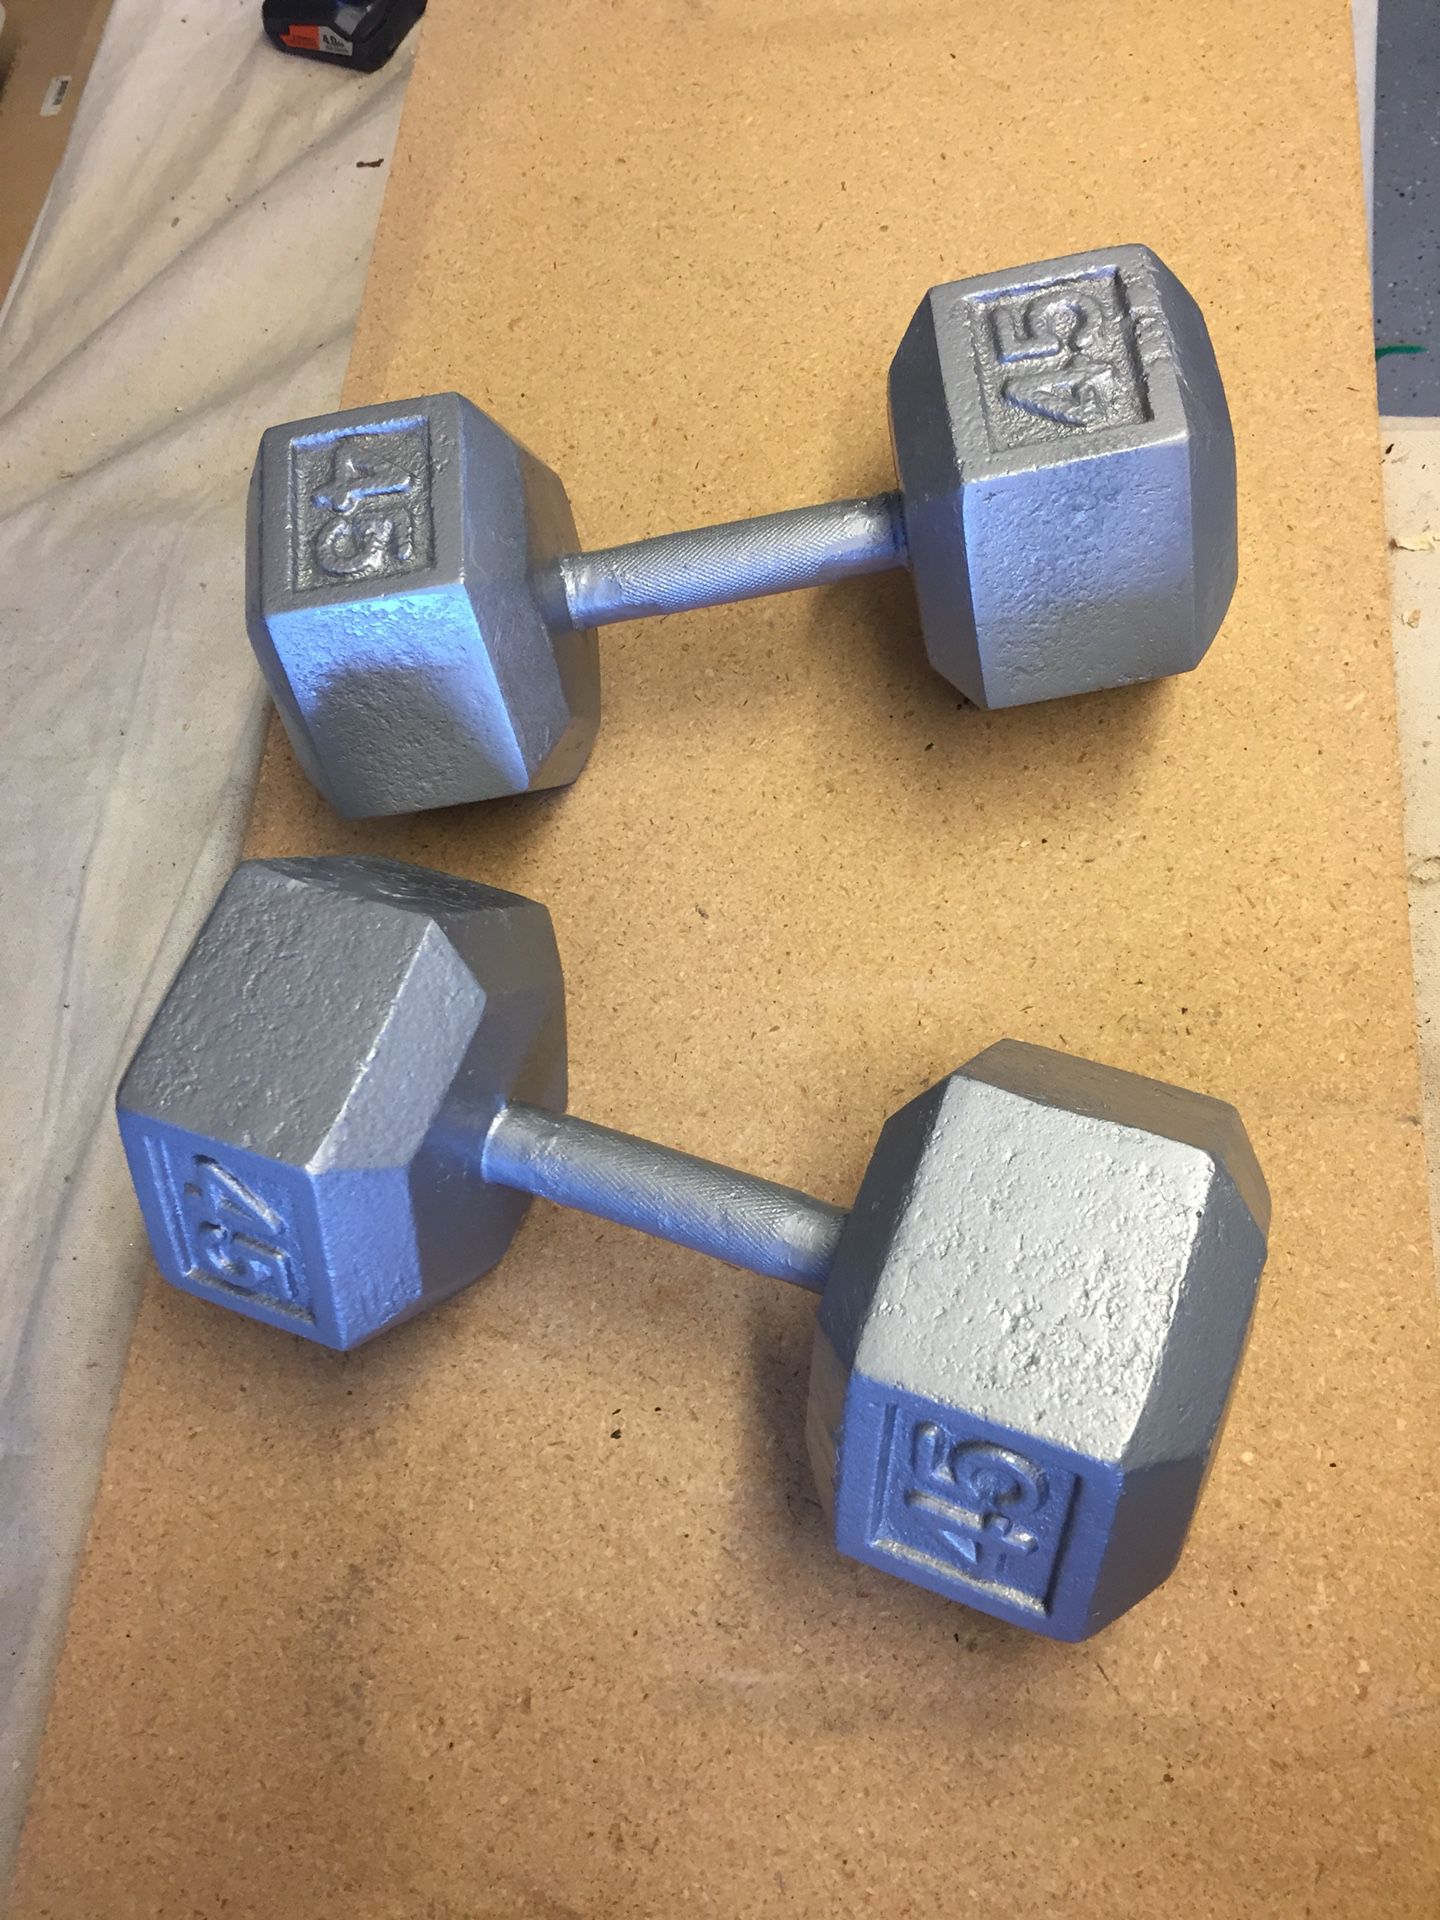 Pair of 45 pound dumbbells